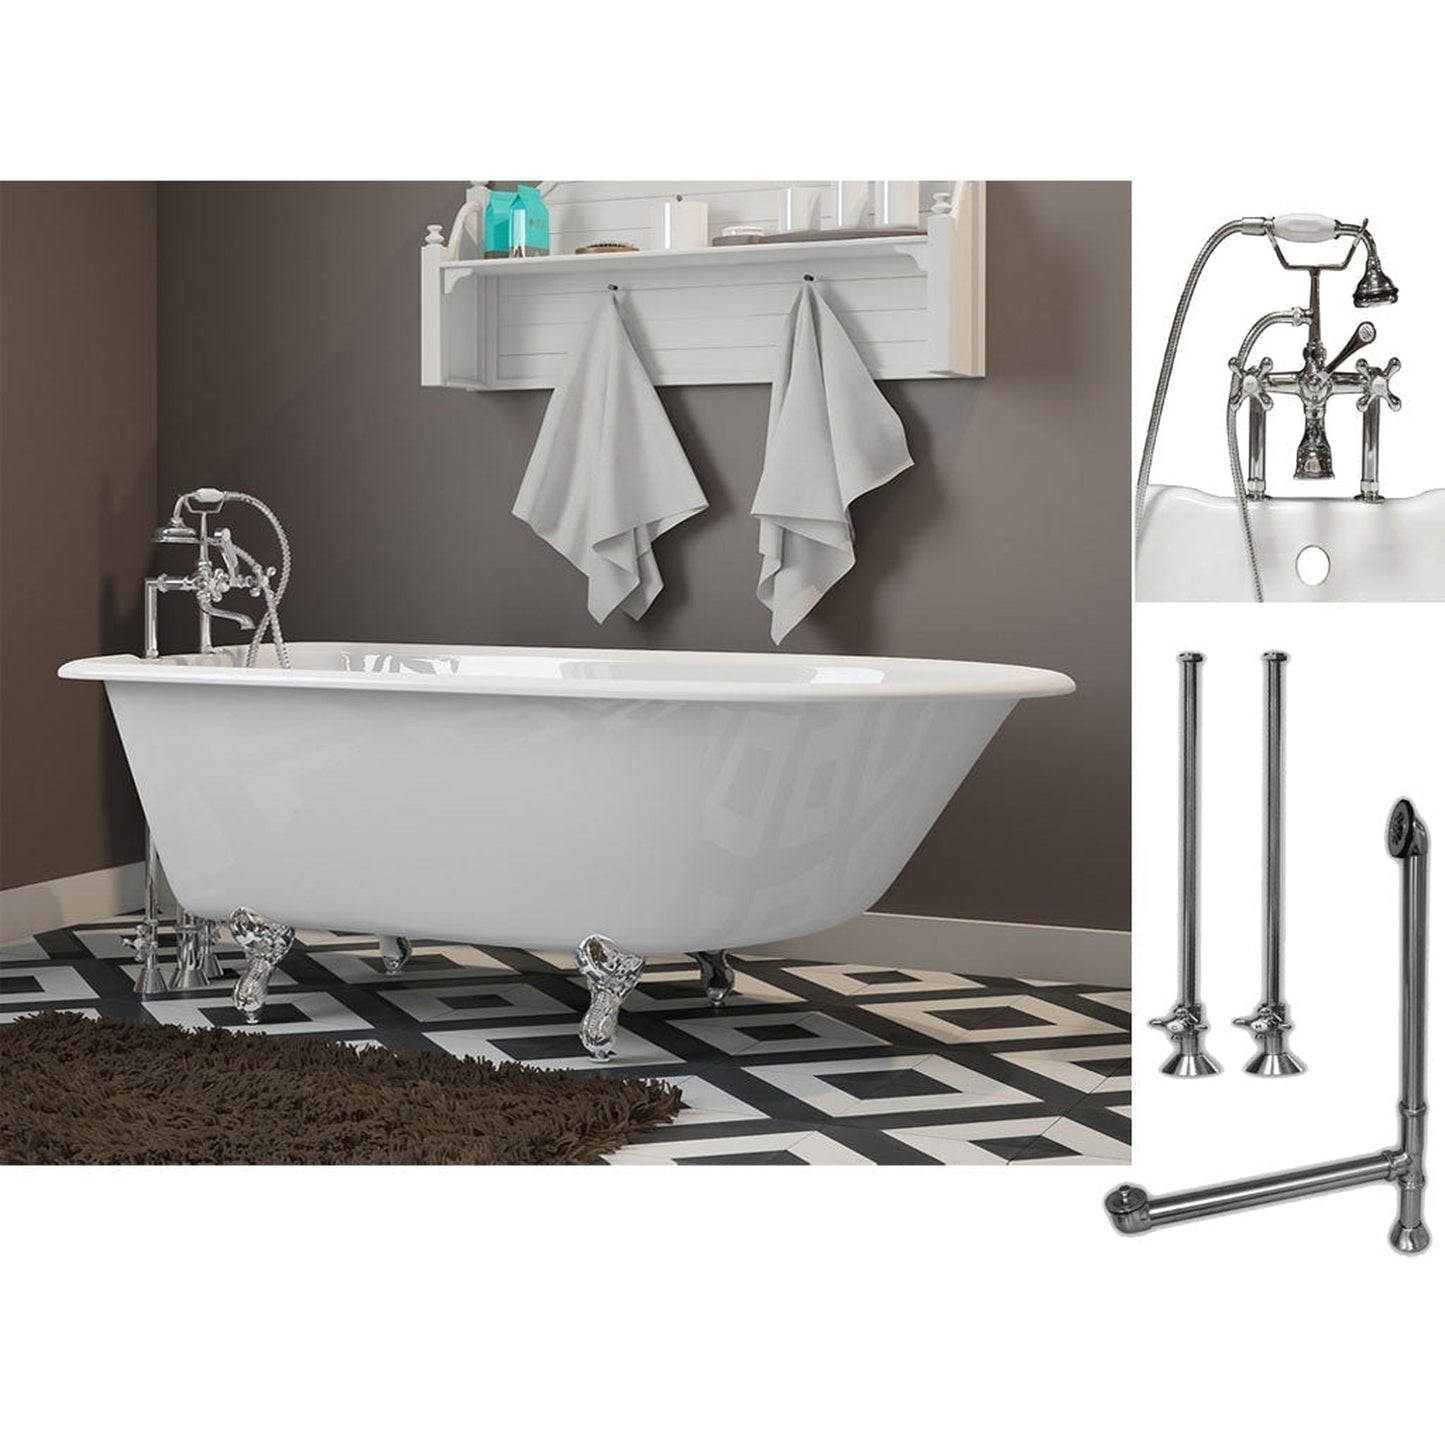 Cambridge Plumbing 54" White Cast Iron Rolled Rim Clawfoot Bathtub With Deck Holes And Complete Plumbing Package Including 6” Riser Deck Mount Faucet, Supply Lines, Drain And Overflow Assembly In Polished Chrome